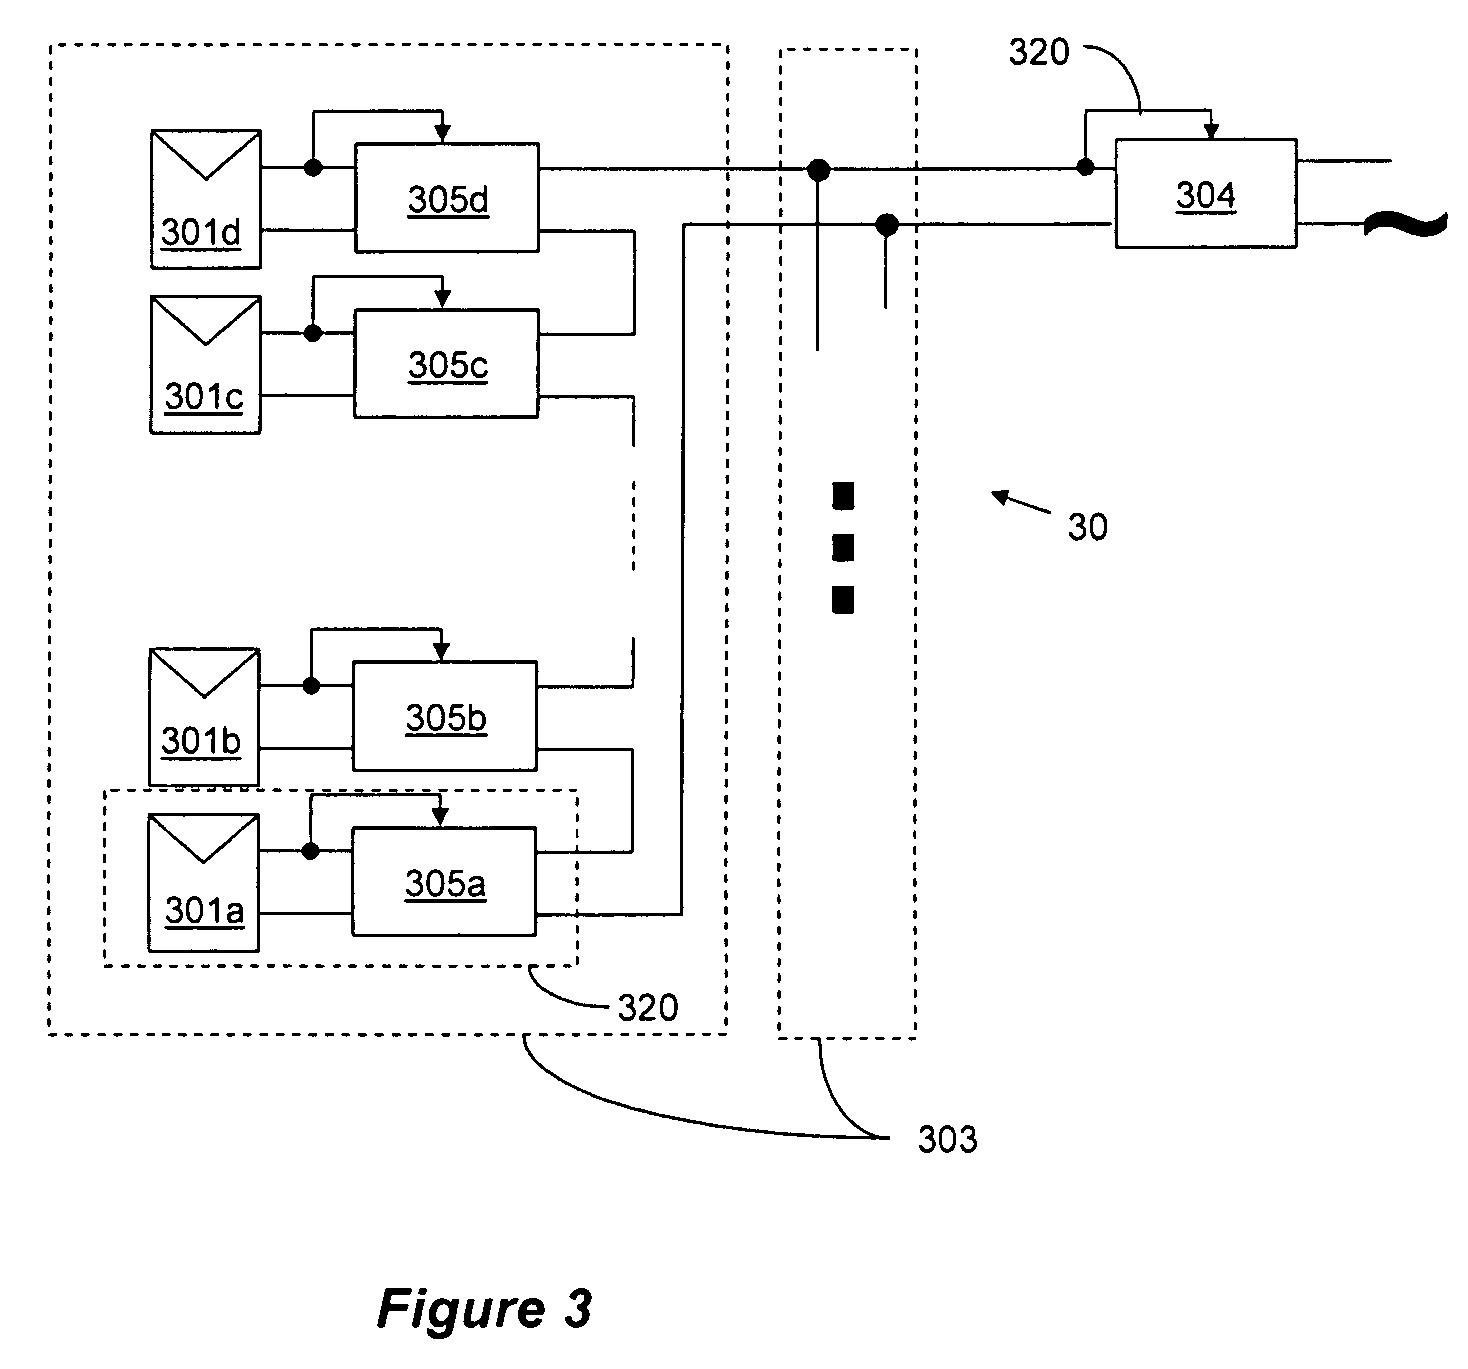 Method for distributed power harvesting using DC power sources